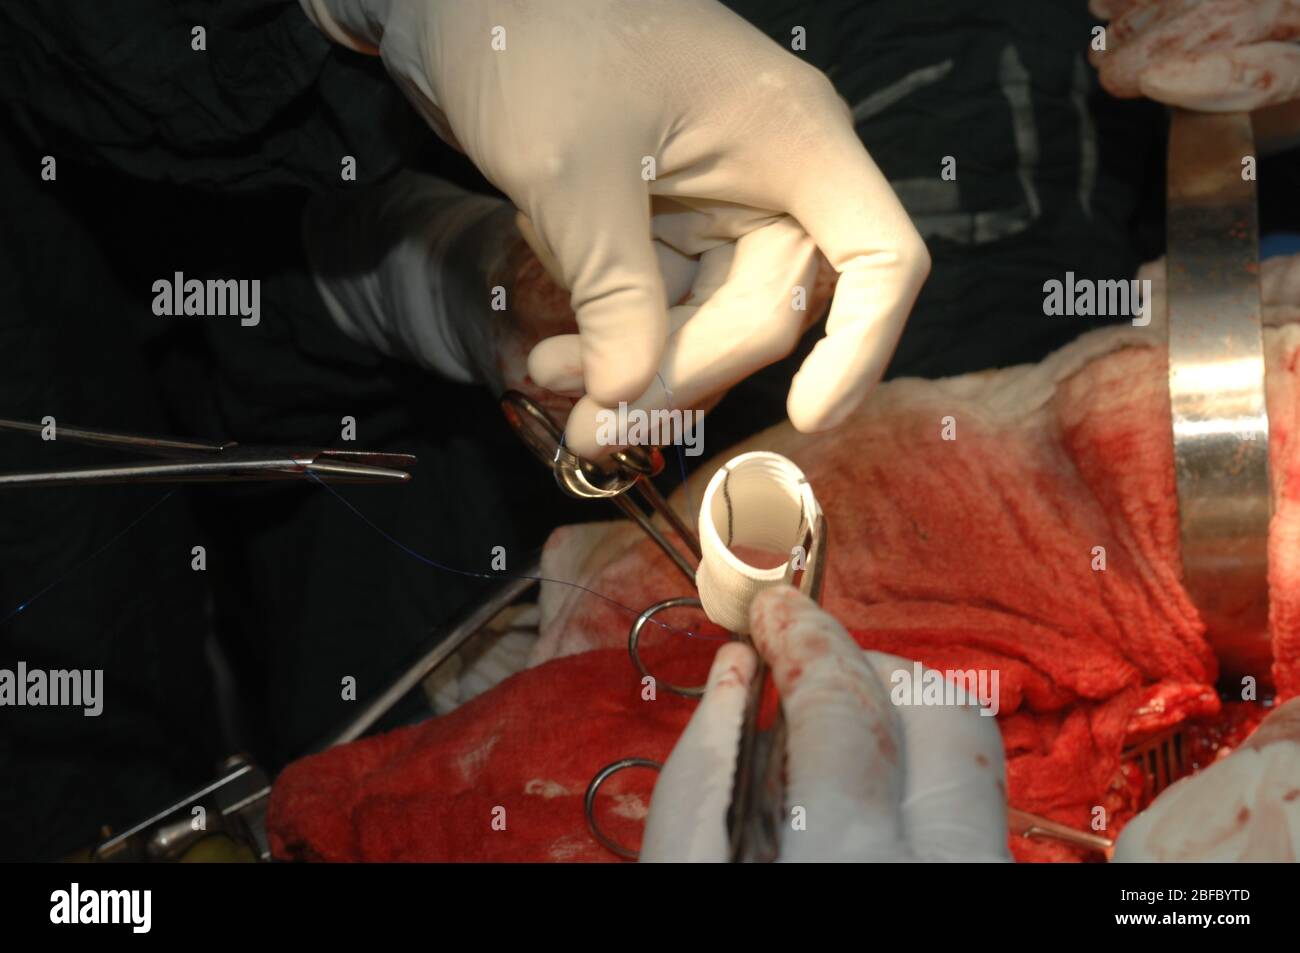 Surgeons suture a dacron graft to the aorta to repair an ascending